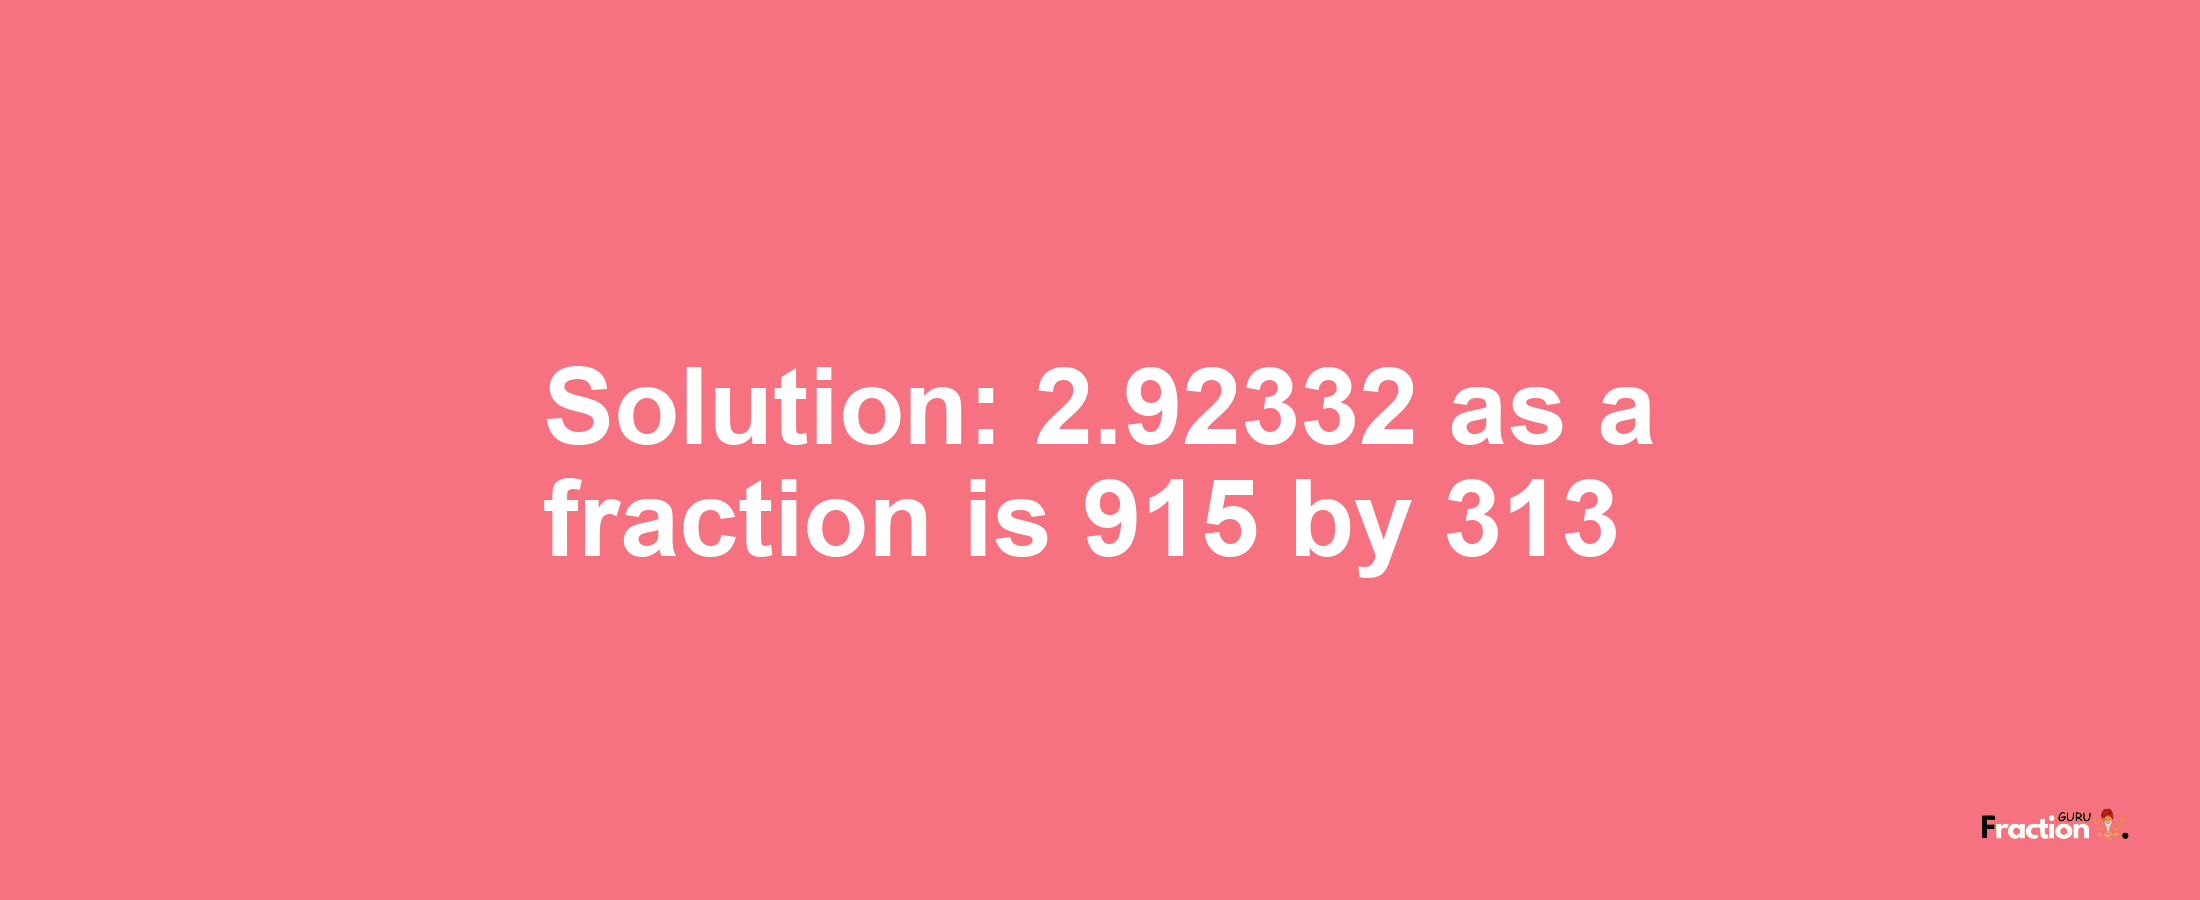 Solution:2.92332 as a fraction is 915/313